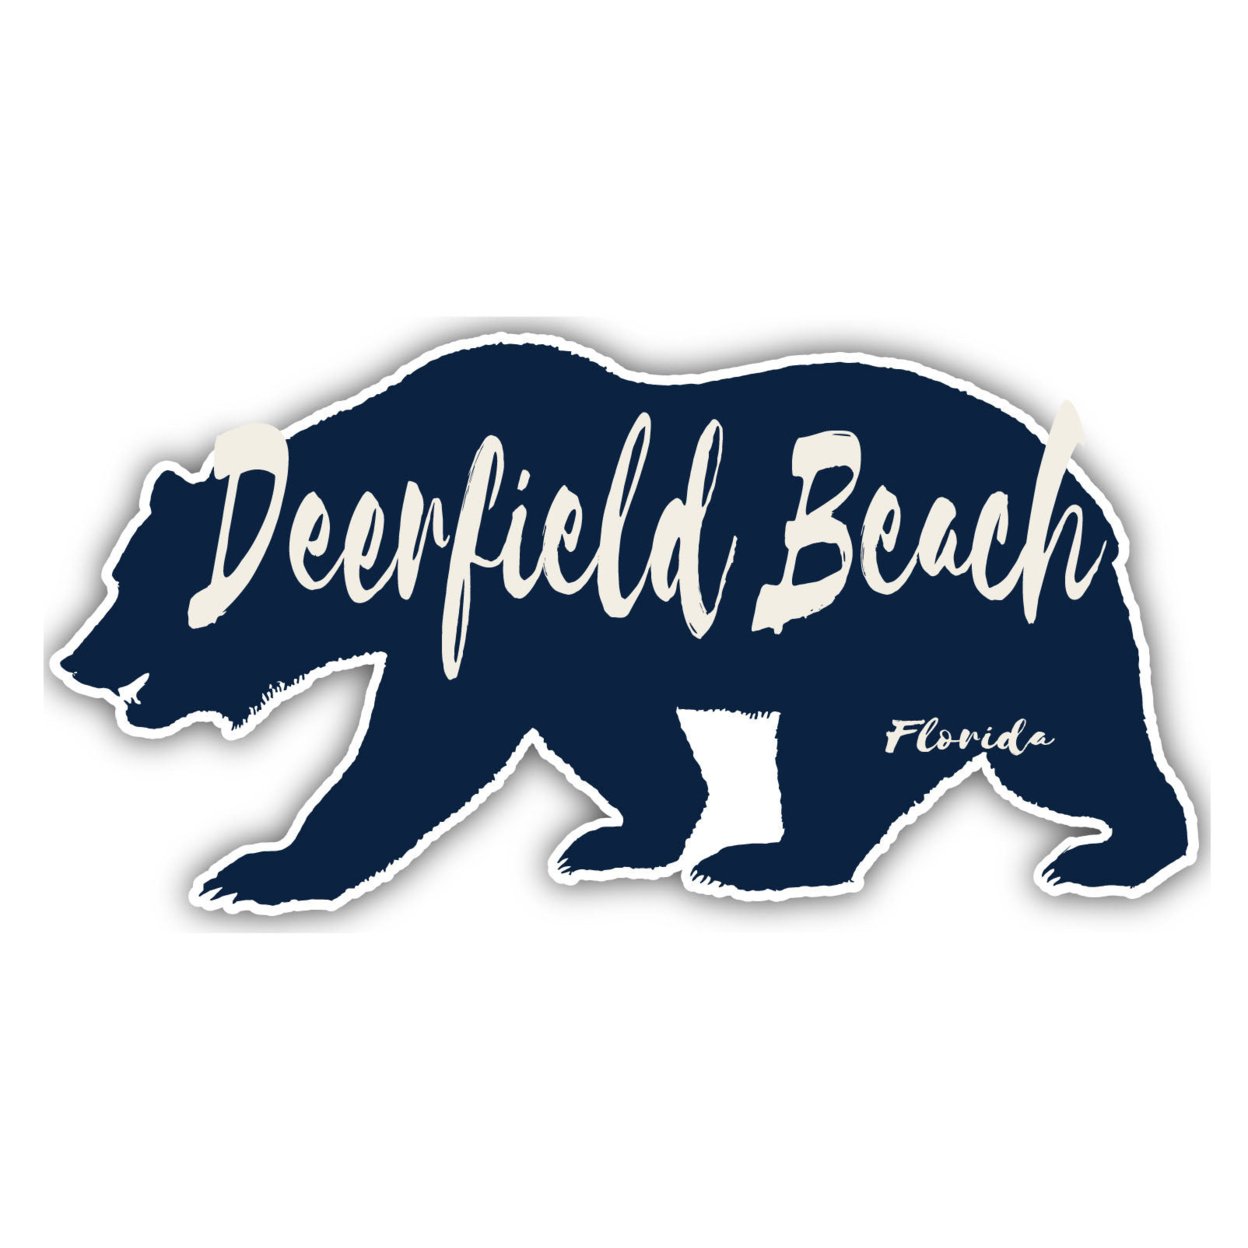 Deerfield Beach Florida Souvenir Decorative Stickers (Choose Theme And Size) - Single Unit, 4-Inch, Great Outdoors